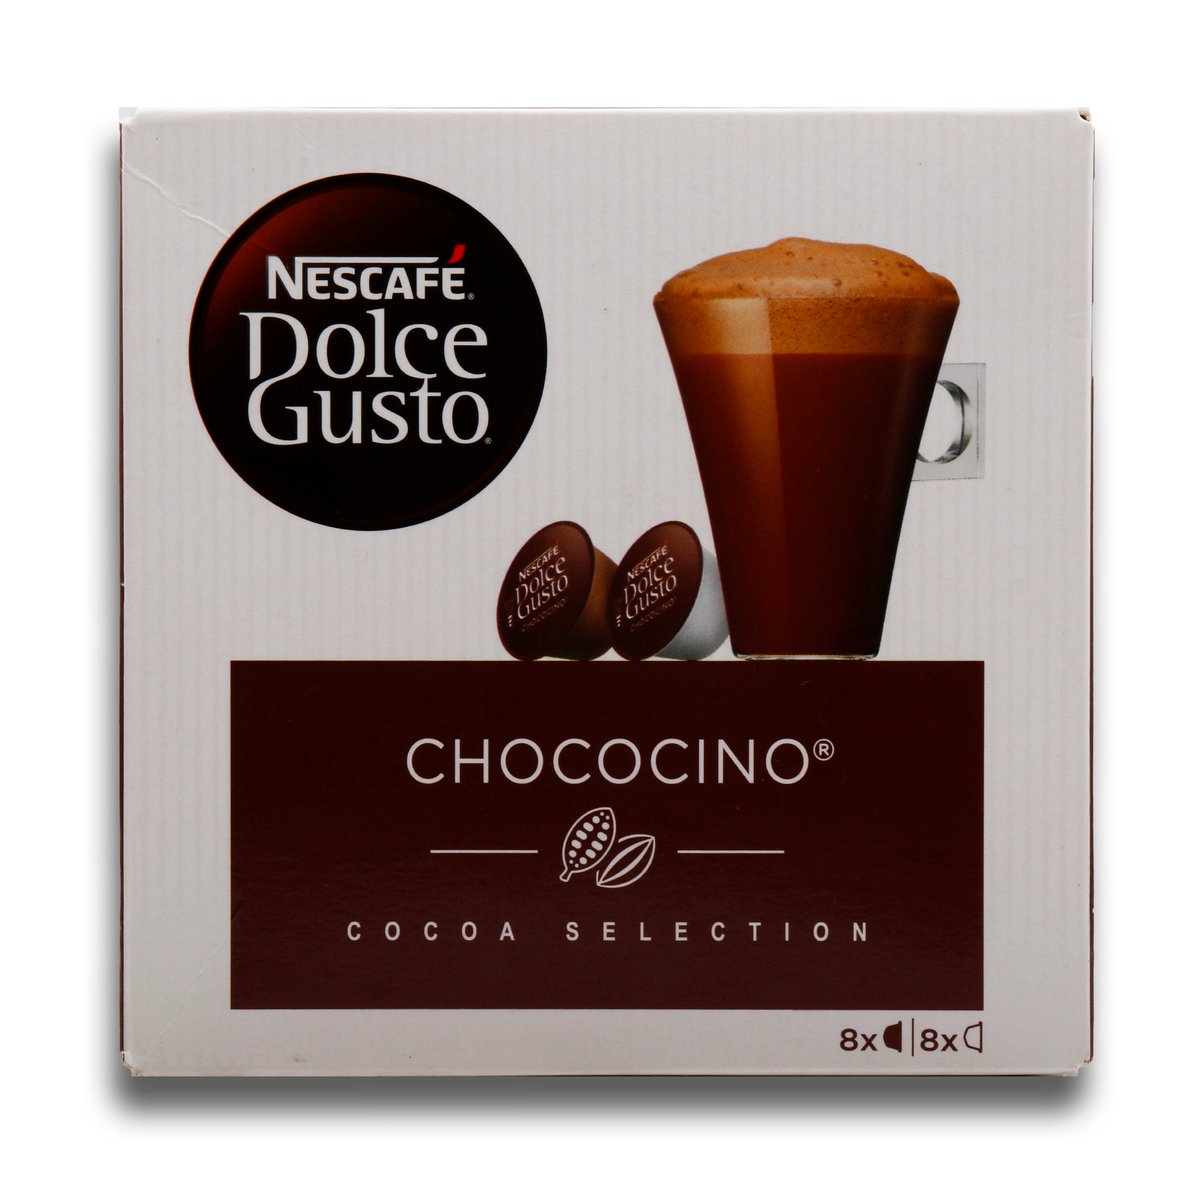 2 NESCAFE CHOCOCINO Chocolate Coffee Capsules Pods for Dolce Gusto Machines